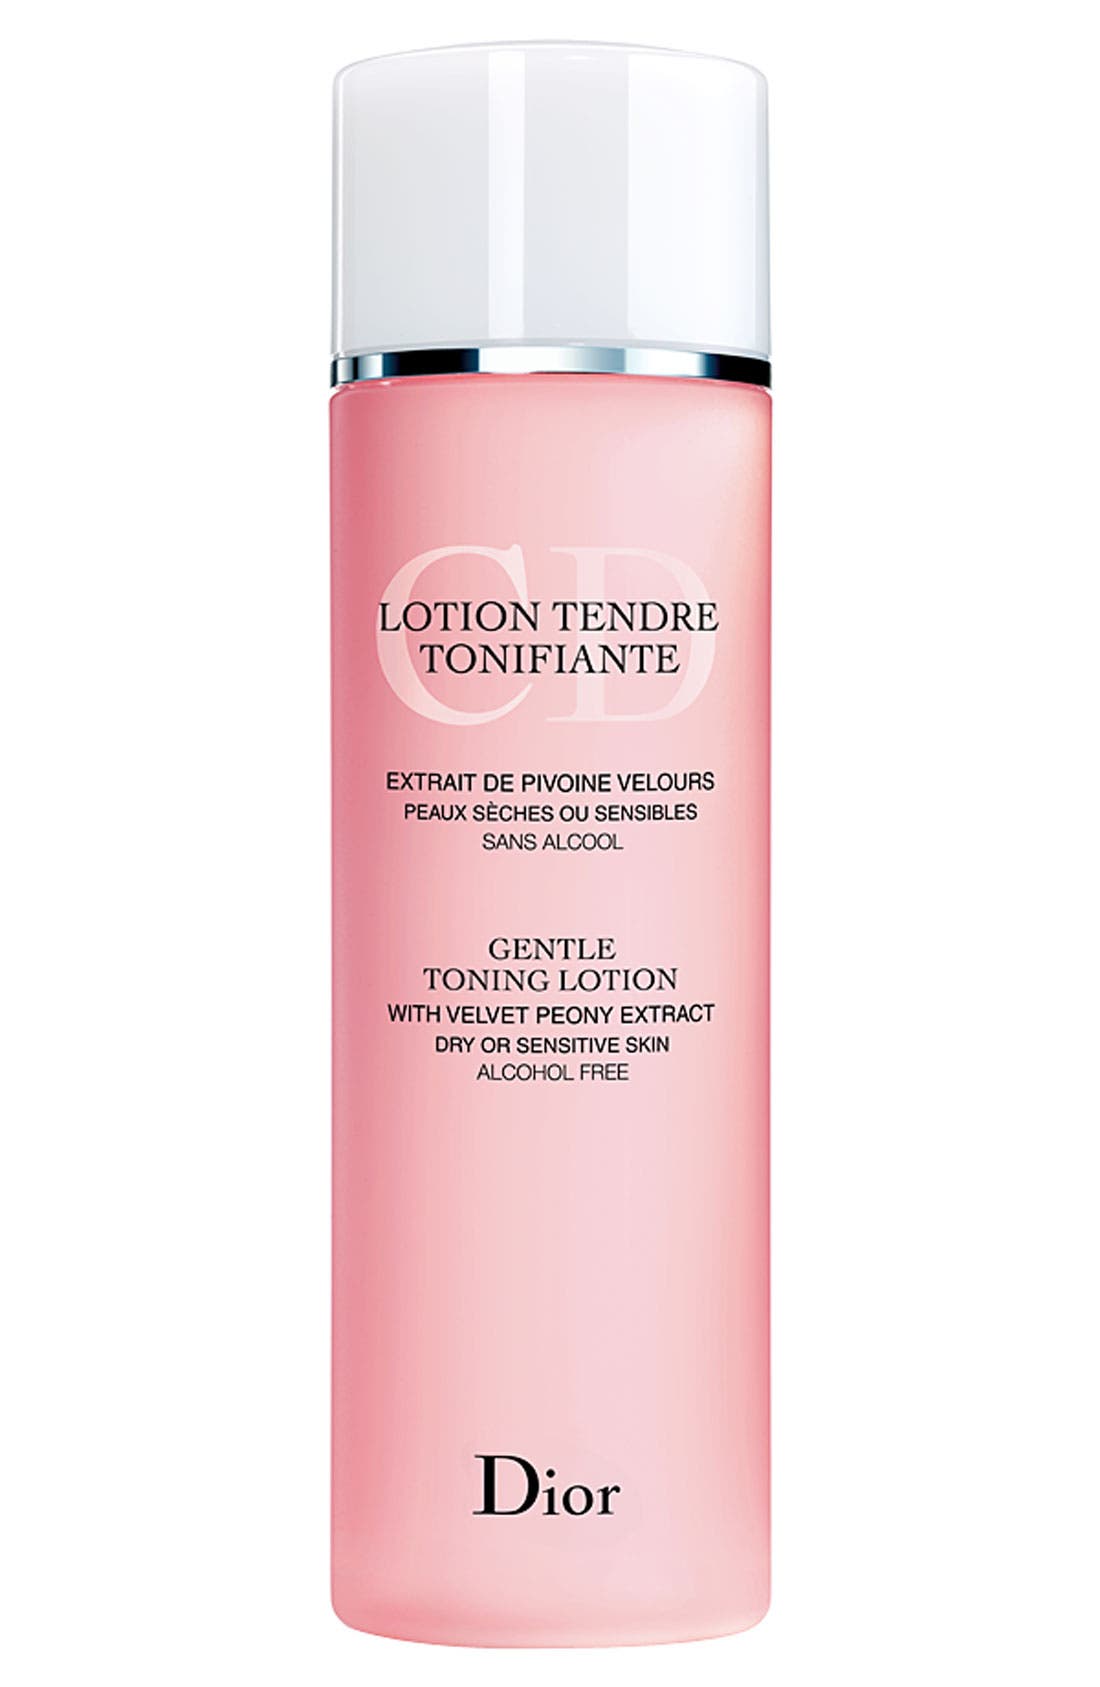 Dior Gentle Toning Lotion for Dry or 